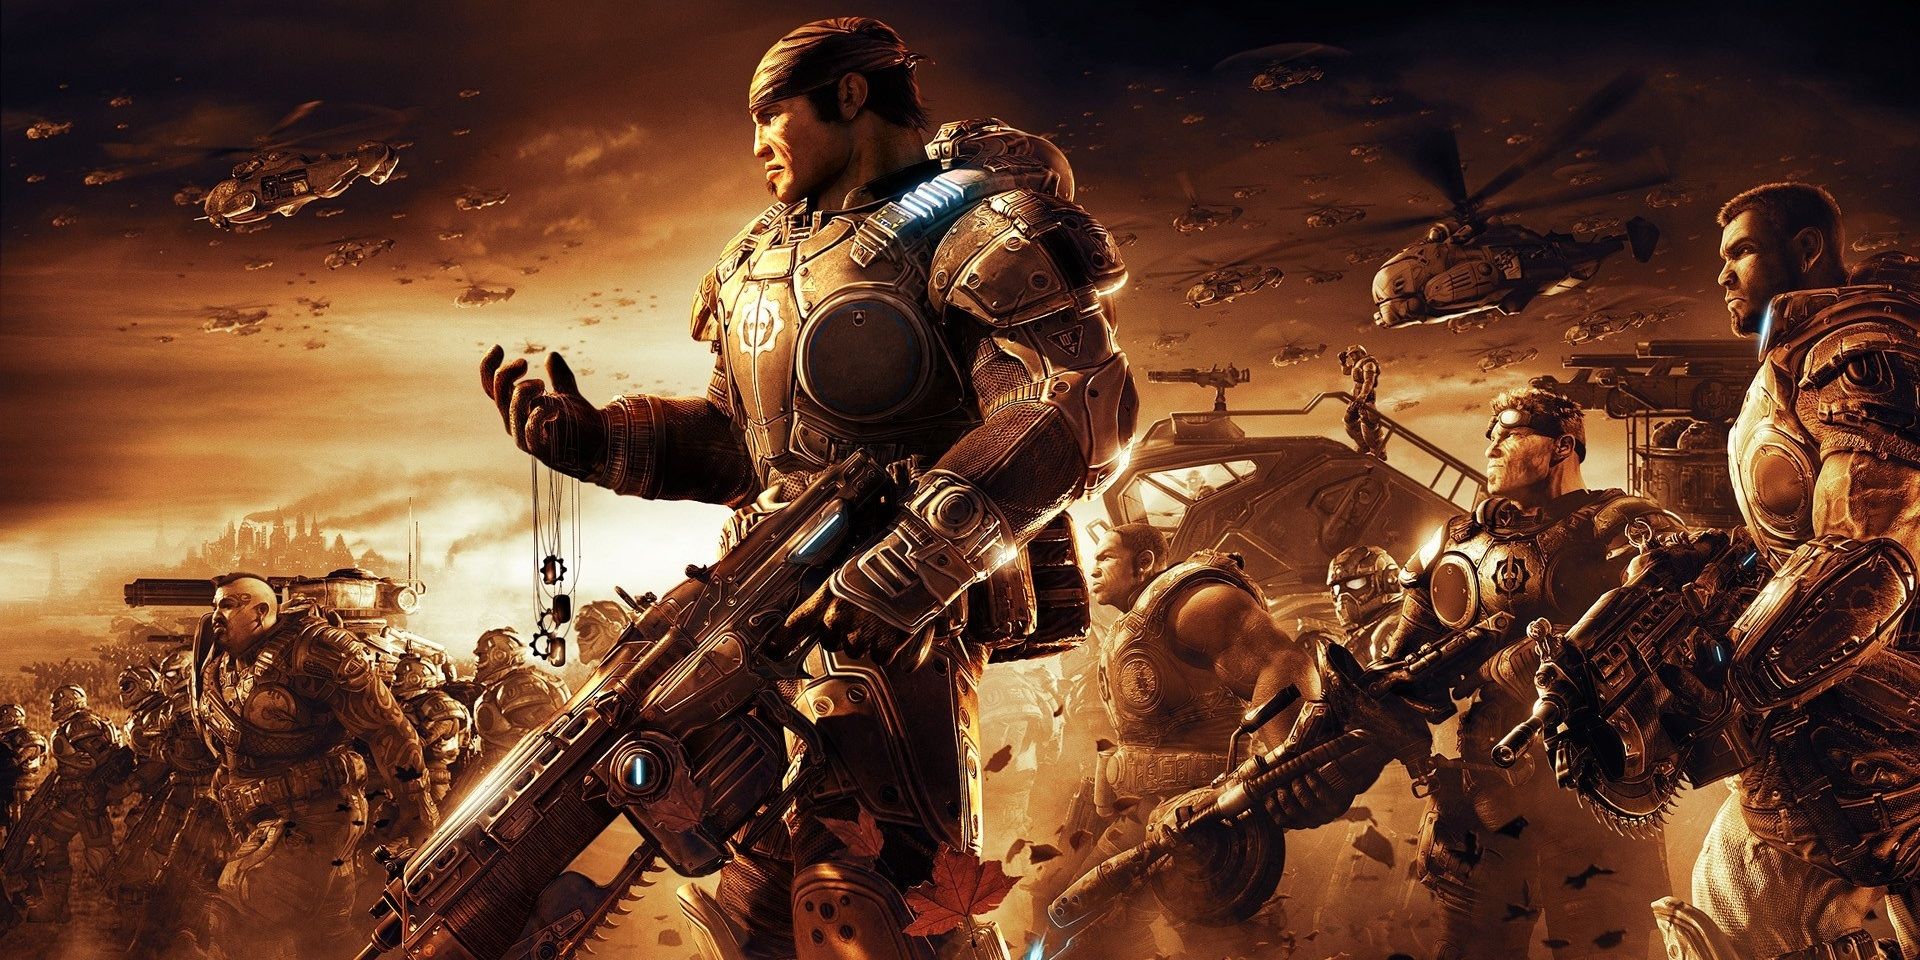 The Delta Squad preparing for battle in the video game, Gears of War 2